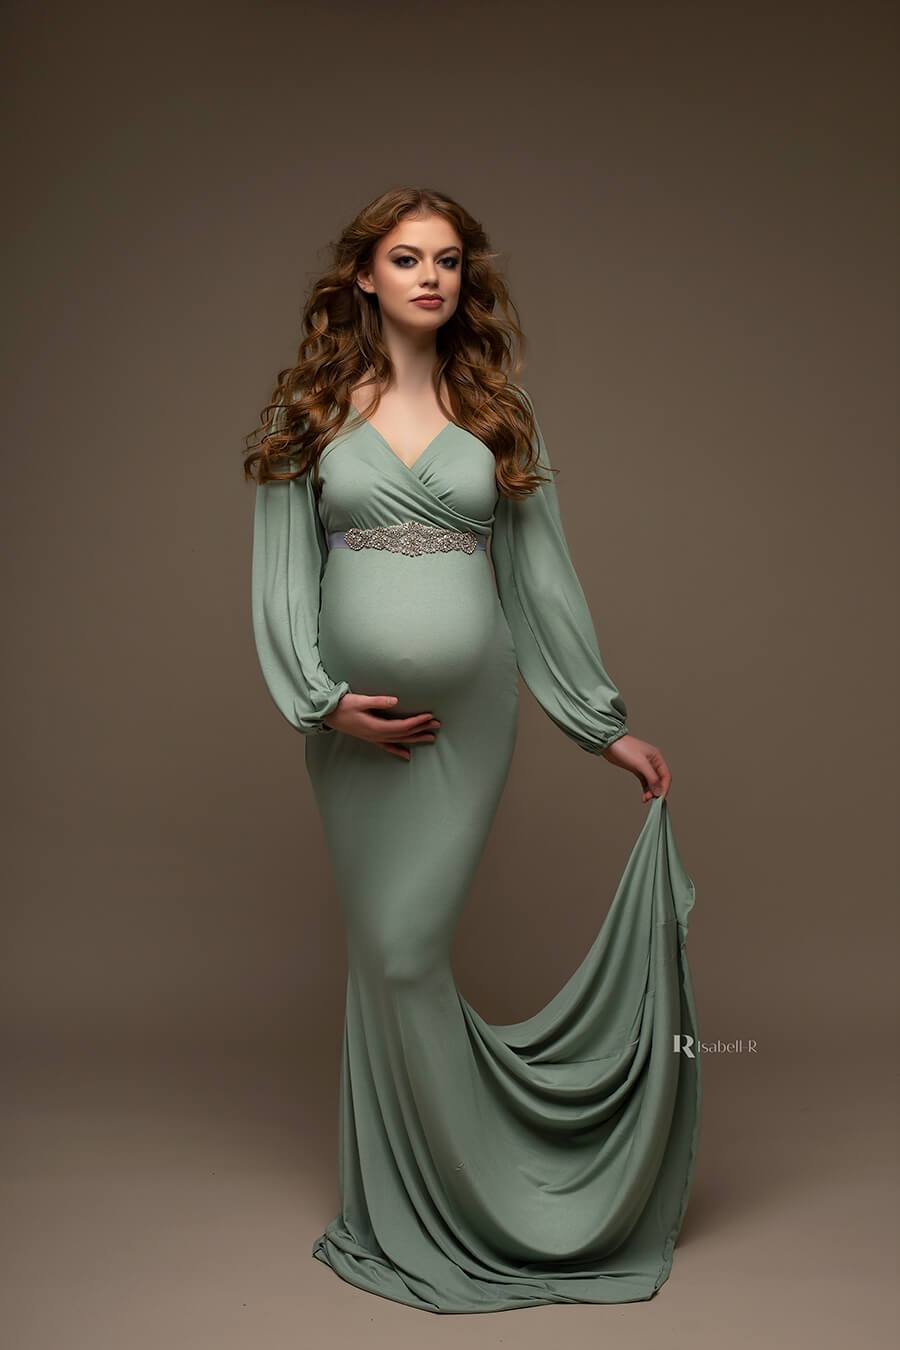 brunette pregnant model poses in a dark studio wearing an azur long jersey dress. the dress features an adjustable sweetheart top and bishop sleeves. the dress is long and features a mermaid skirt.